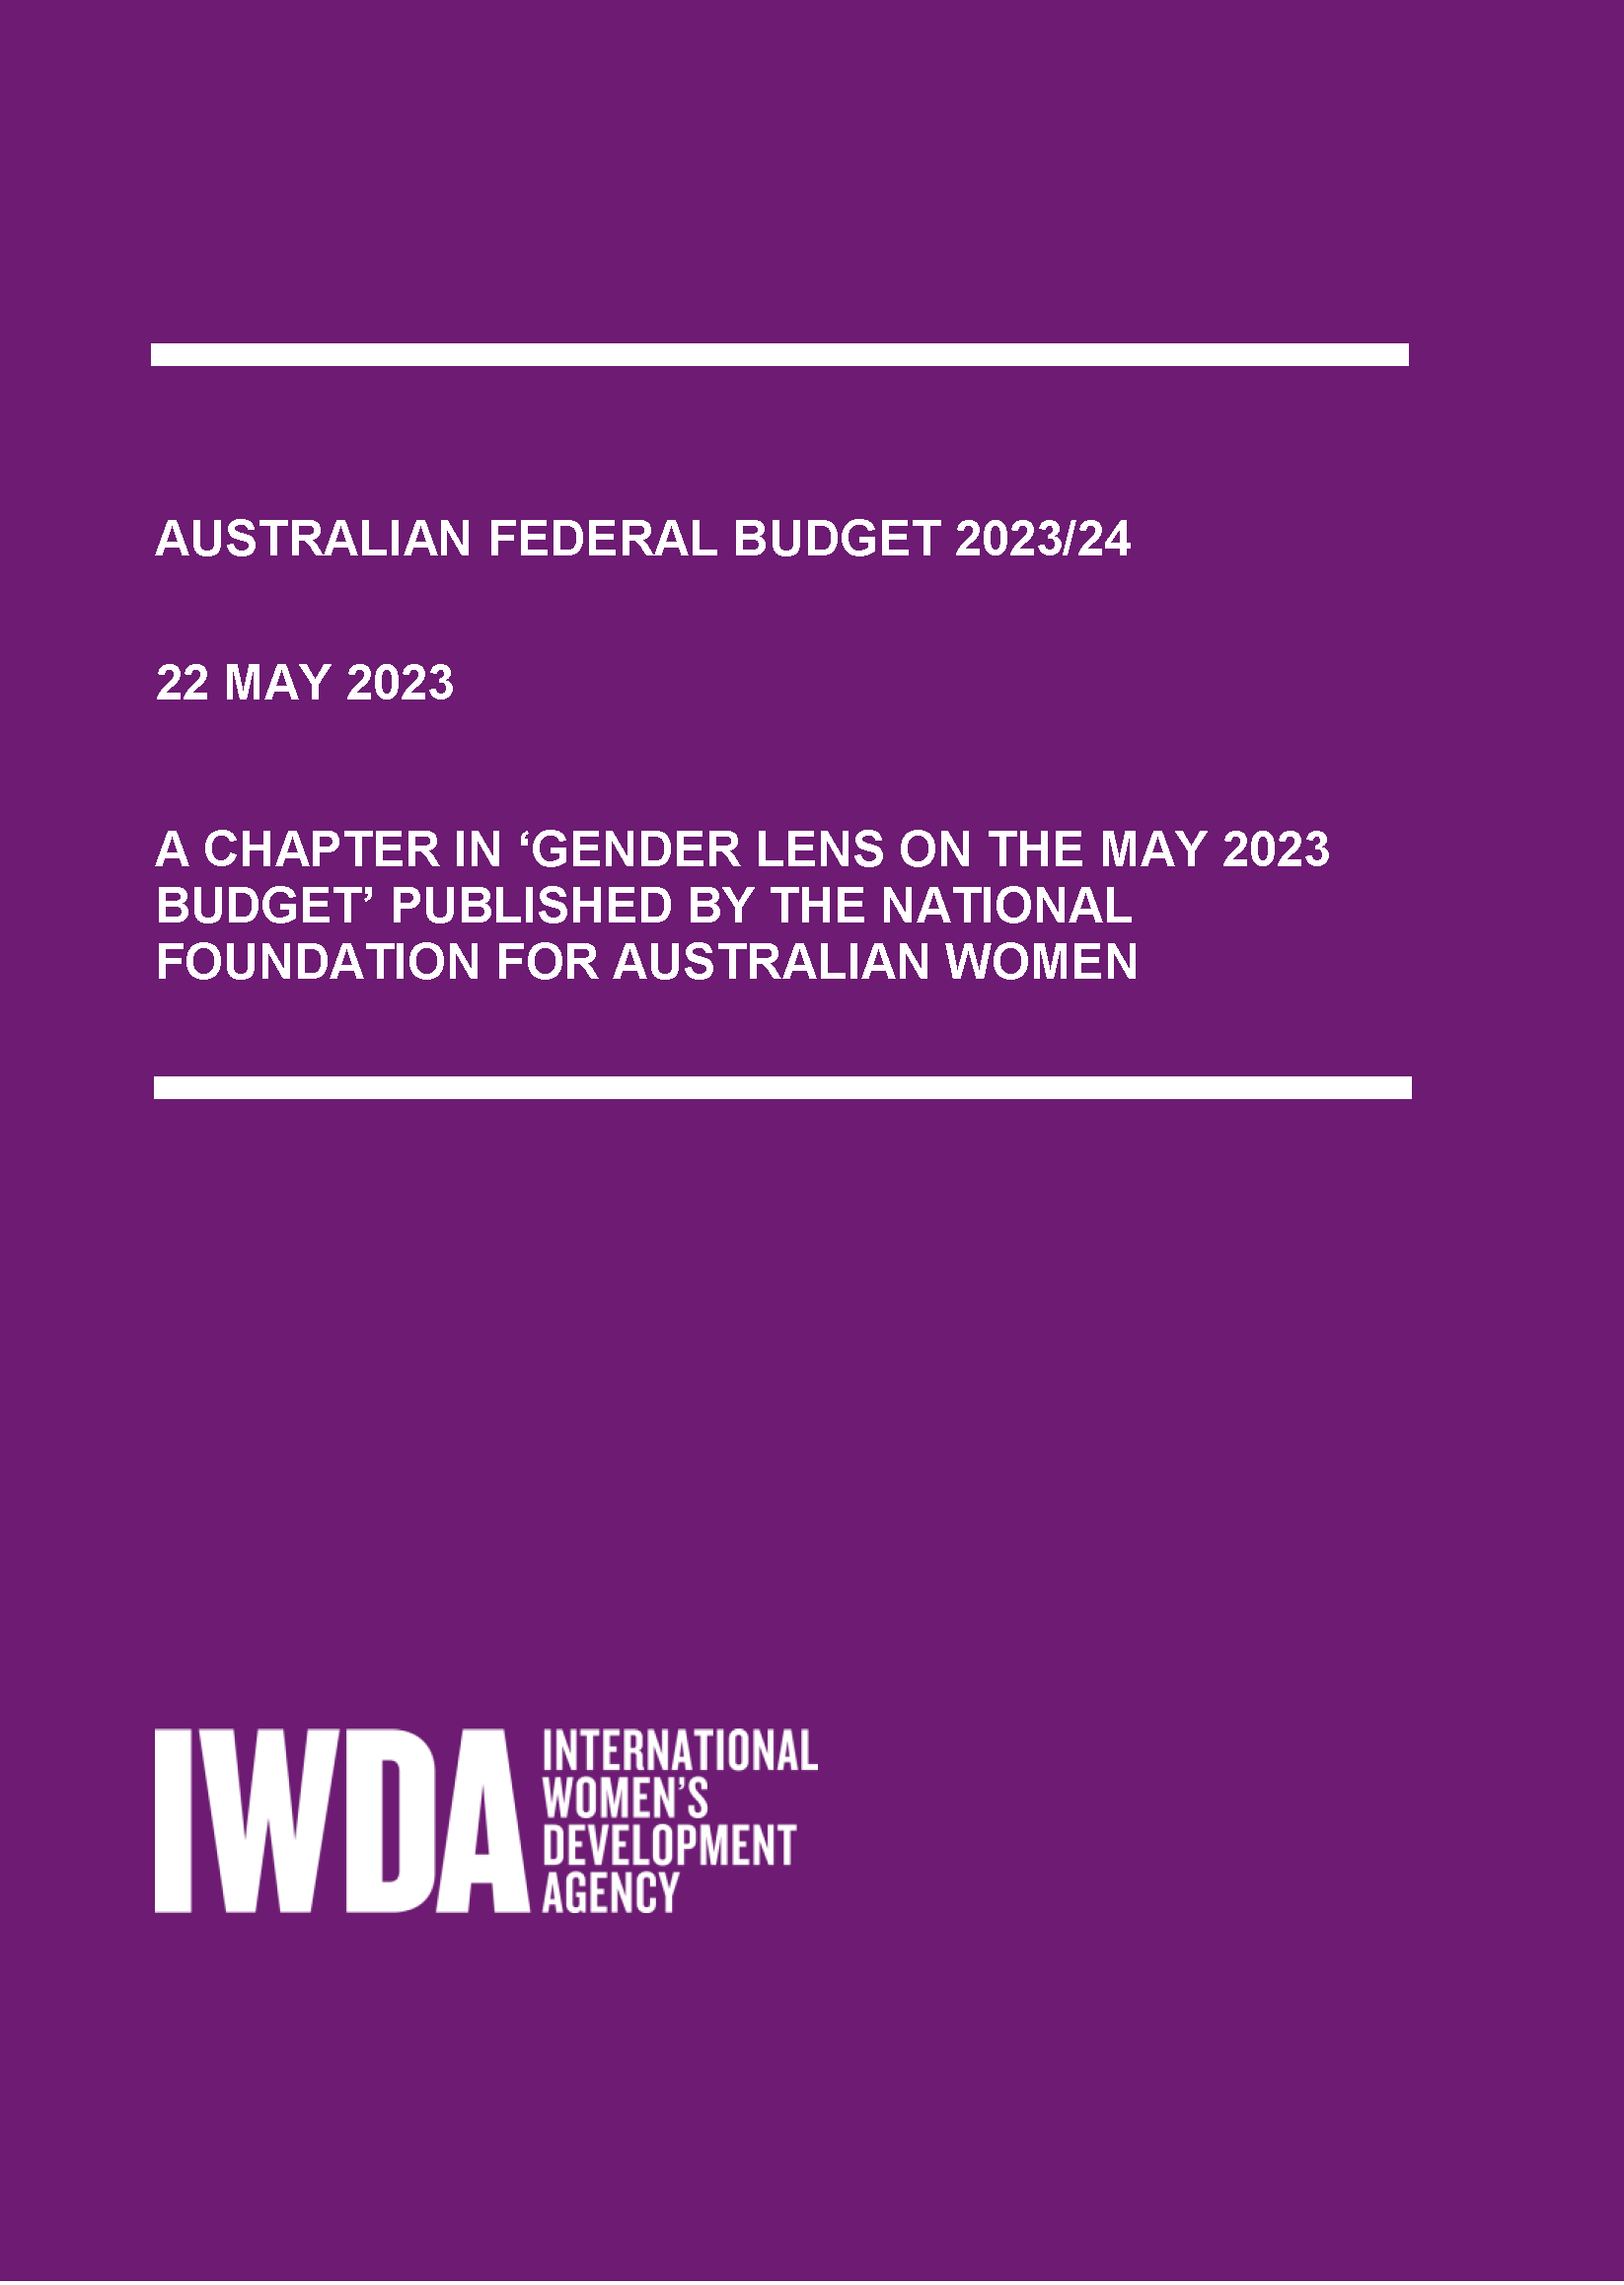 Purple cover page with white heading text for the Budget Anaysis